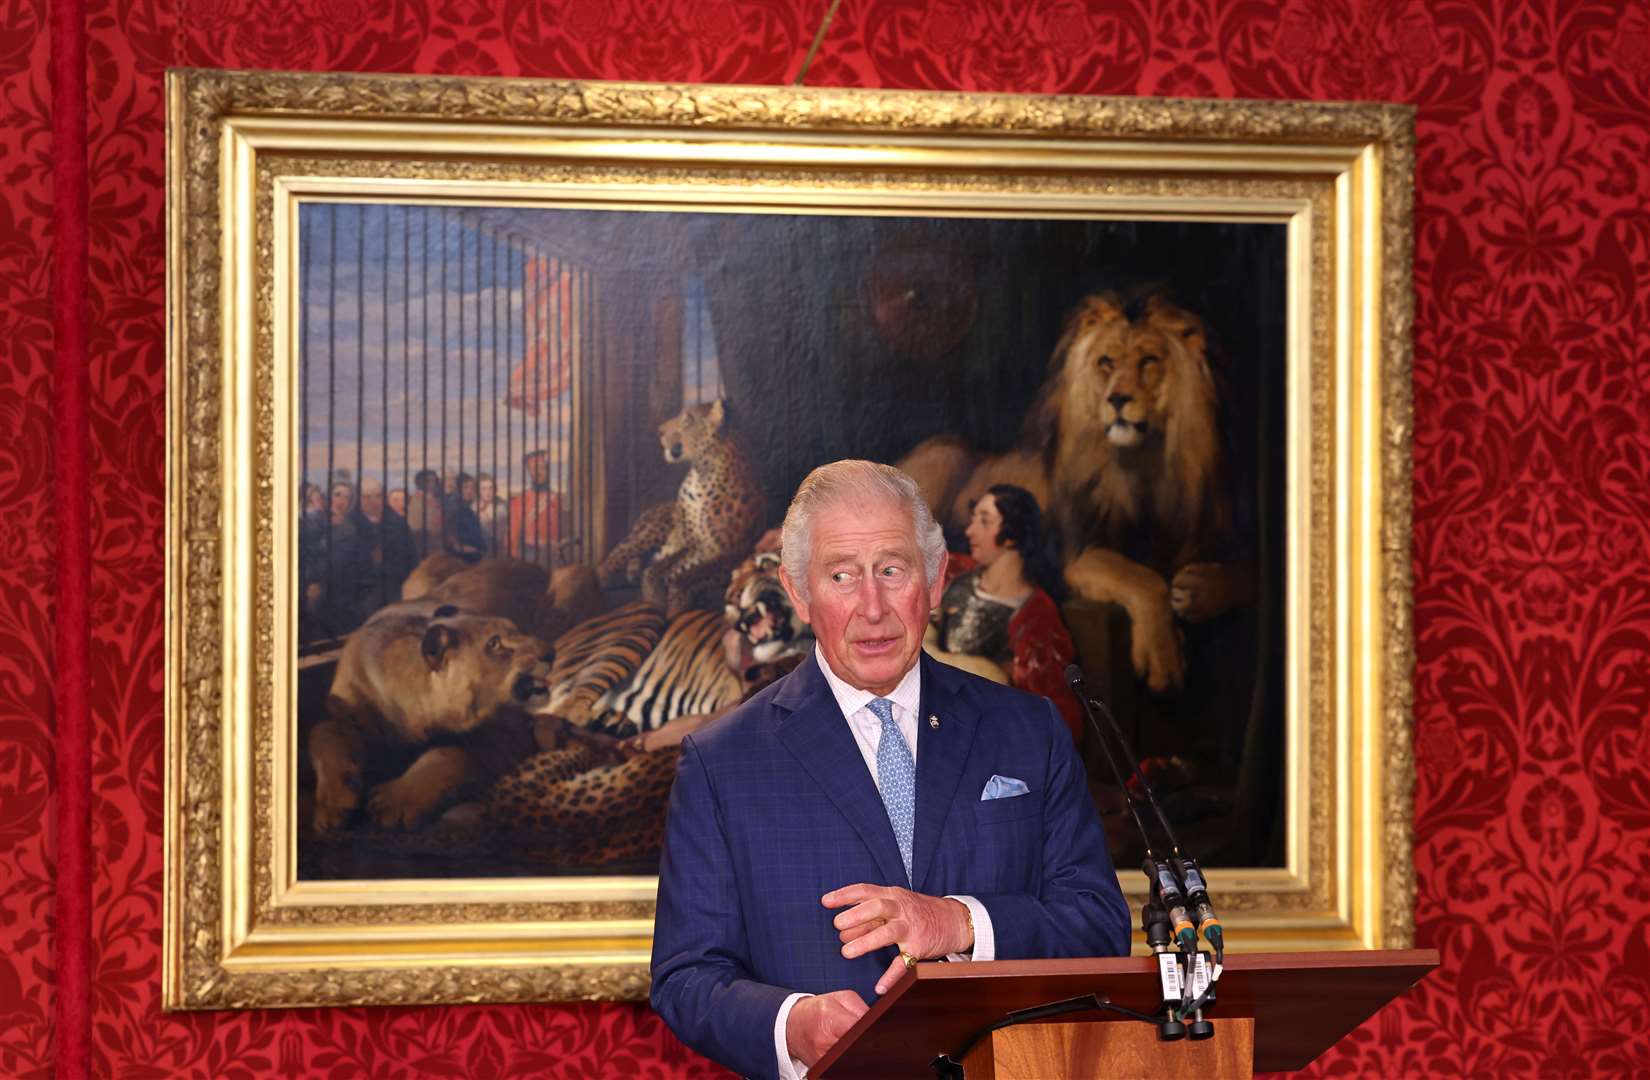 Charles praised the determination of the award winners during the Prince’s Trust event (Tim P. Whitby/PA)